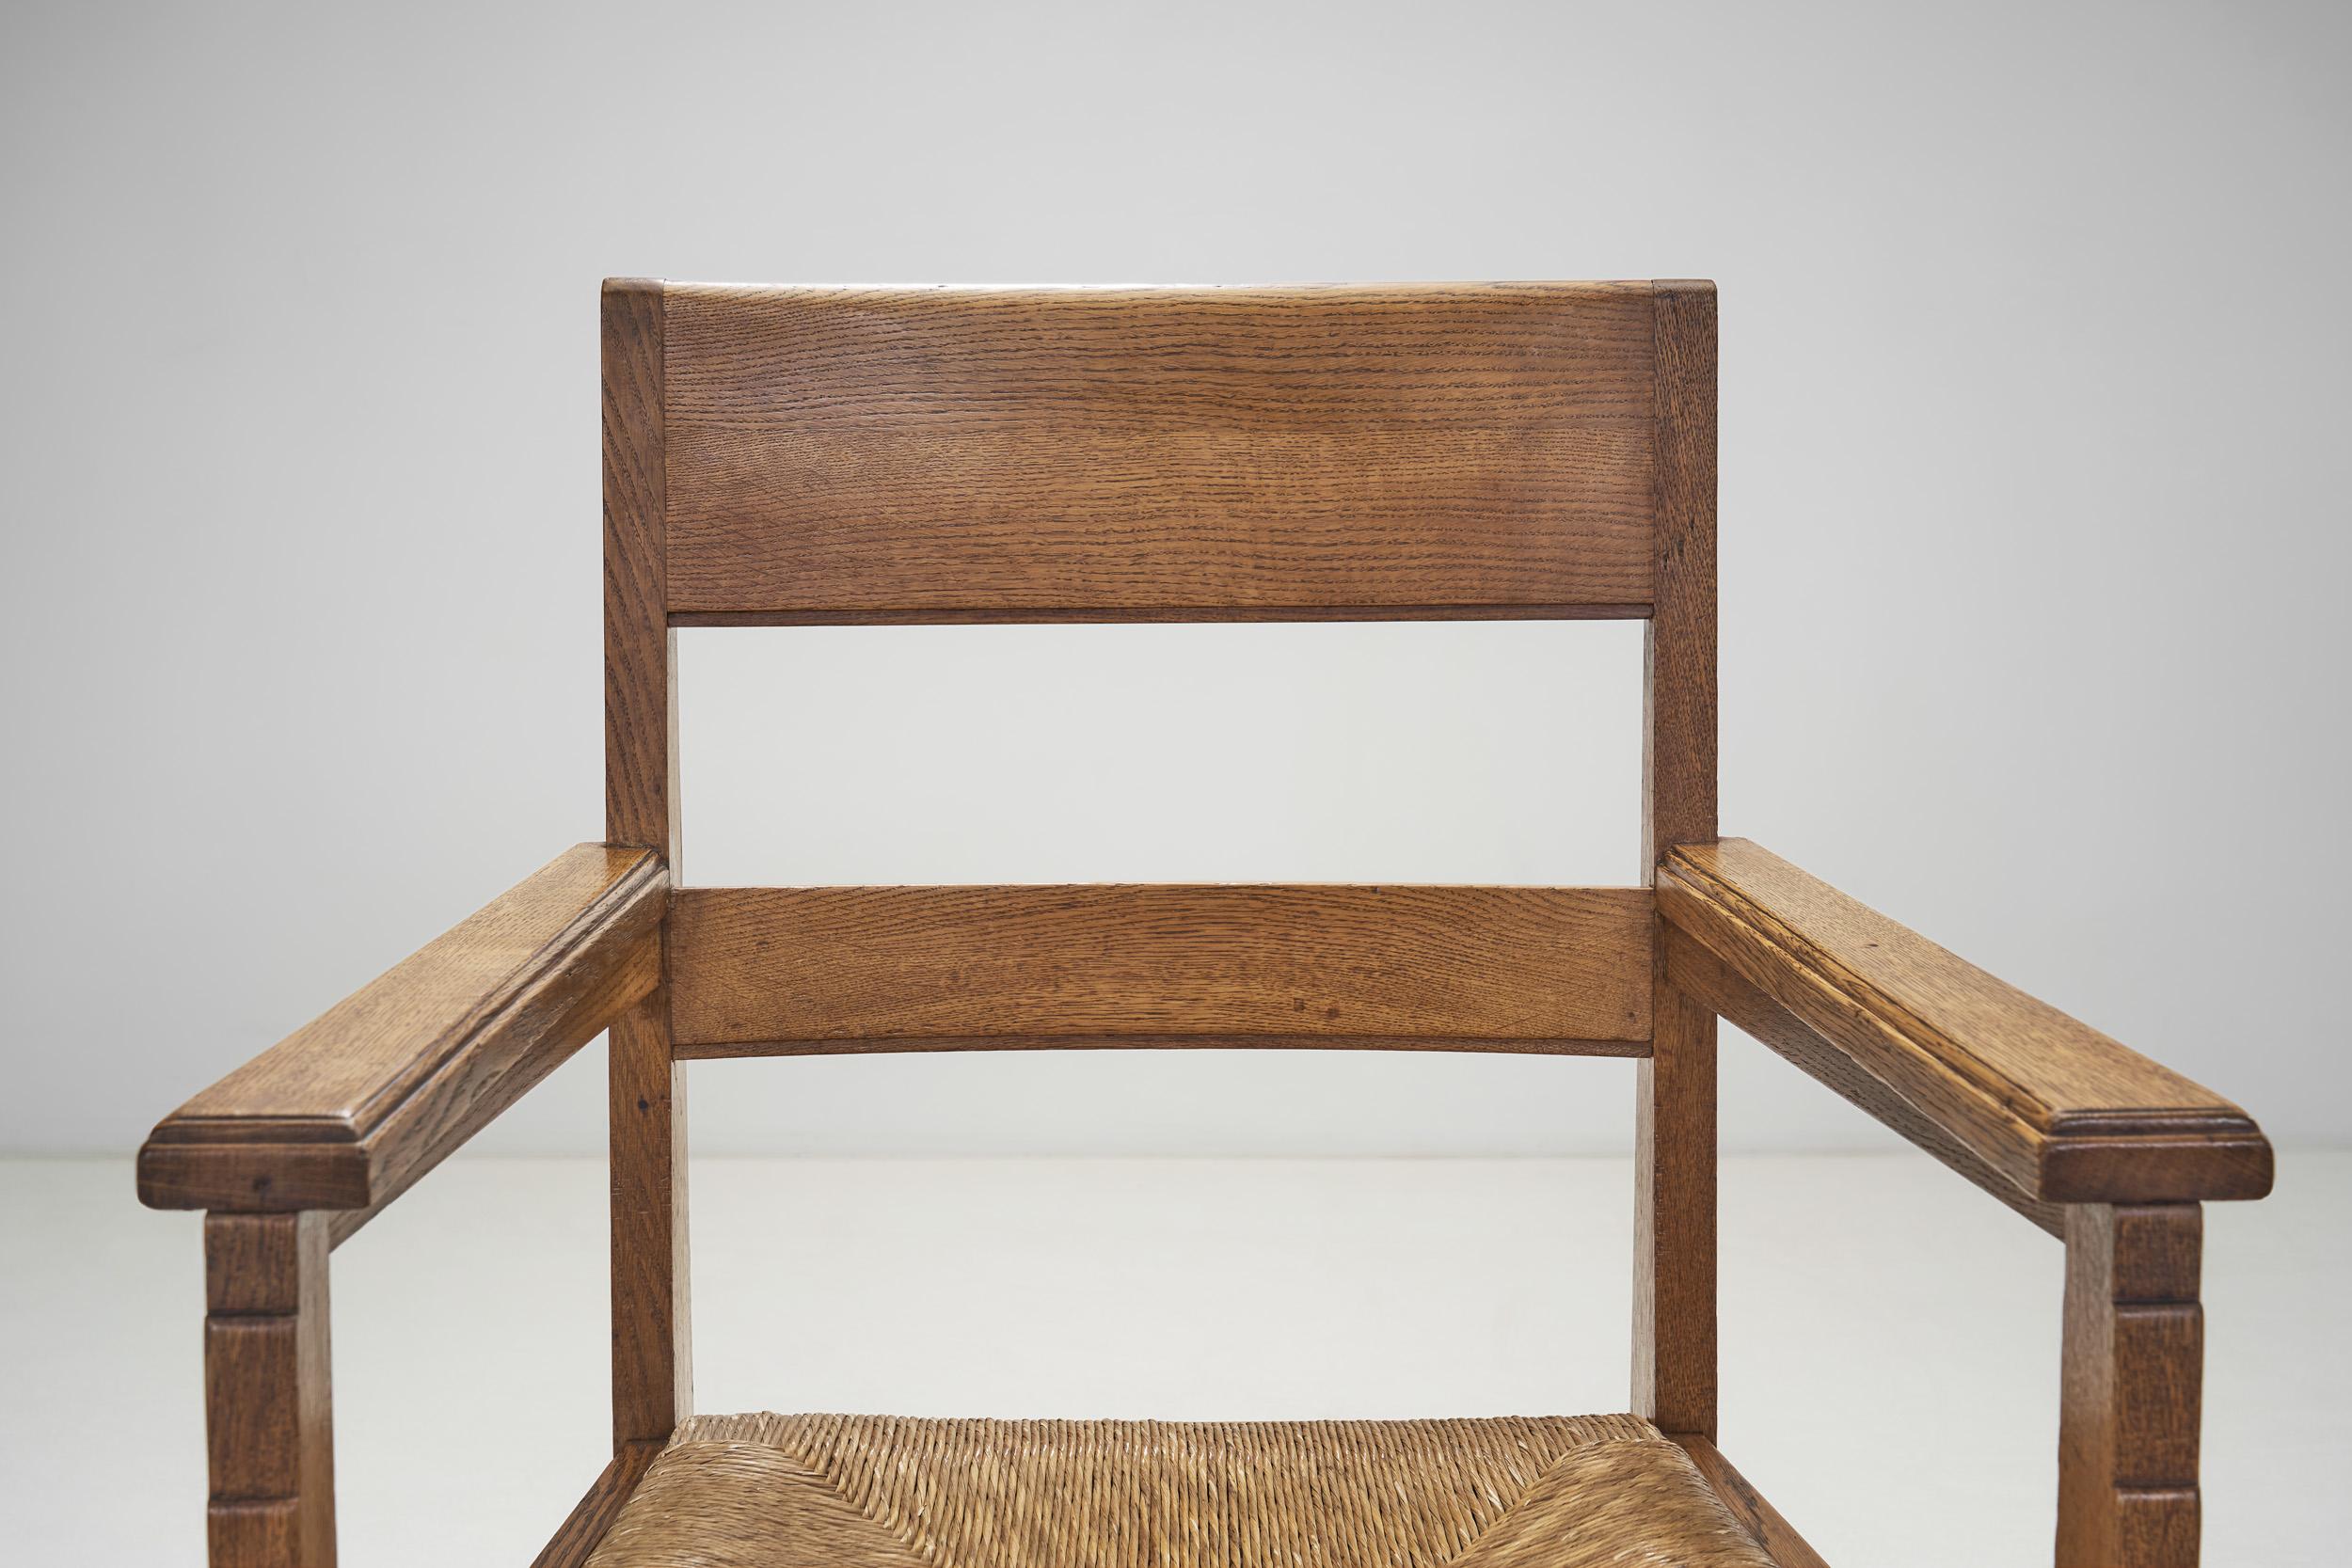 Dutch Oak Art Deco Chairs with Rush Seats, The Netherlands 1920s For Sale 3